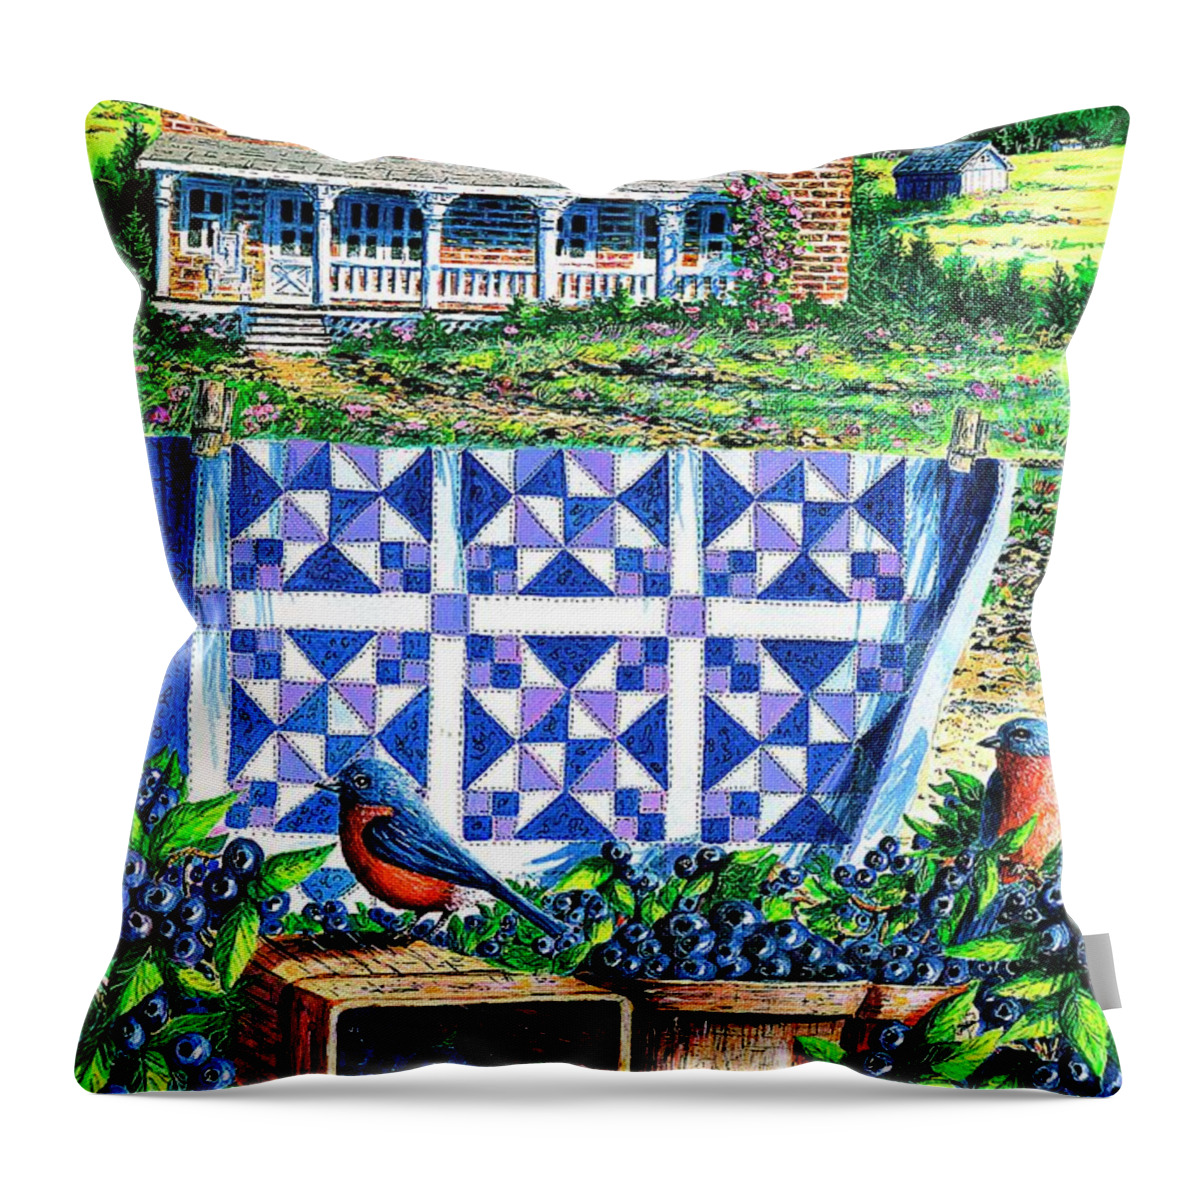 Blueberries Throw Pillow featuring the painting Bluebirds and Blueberries by Diane Phalen